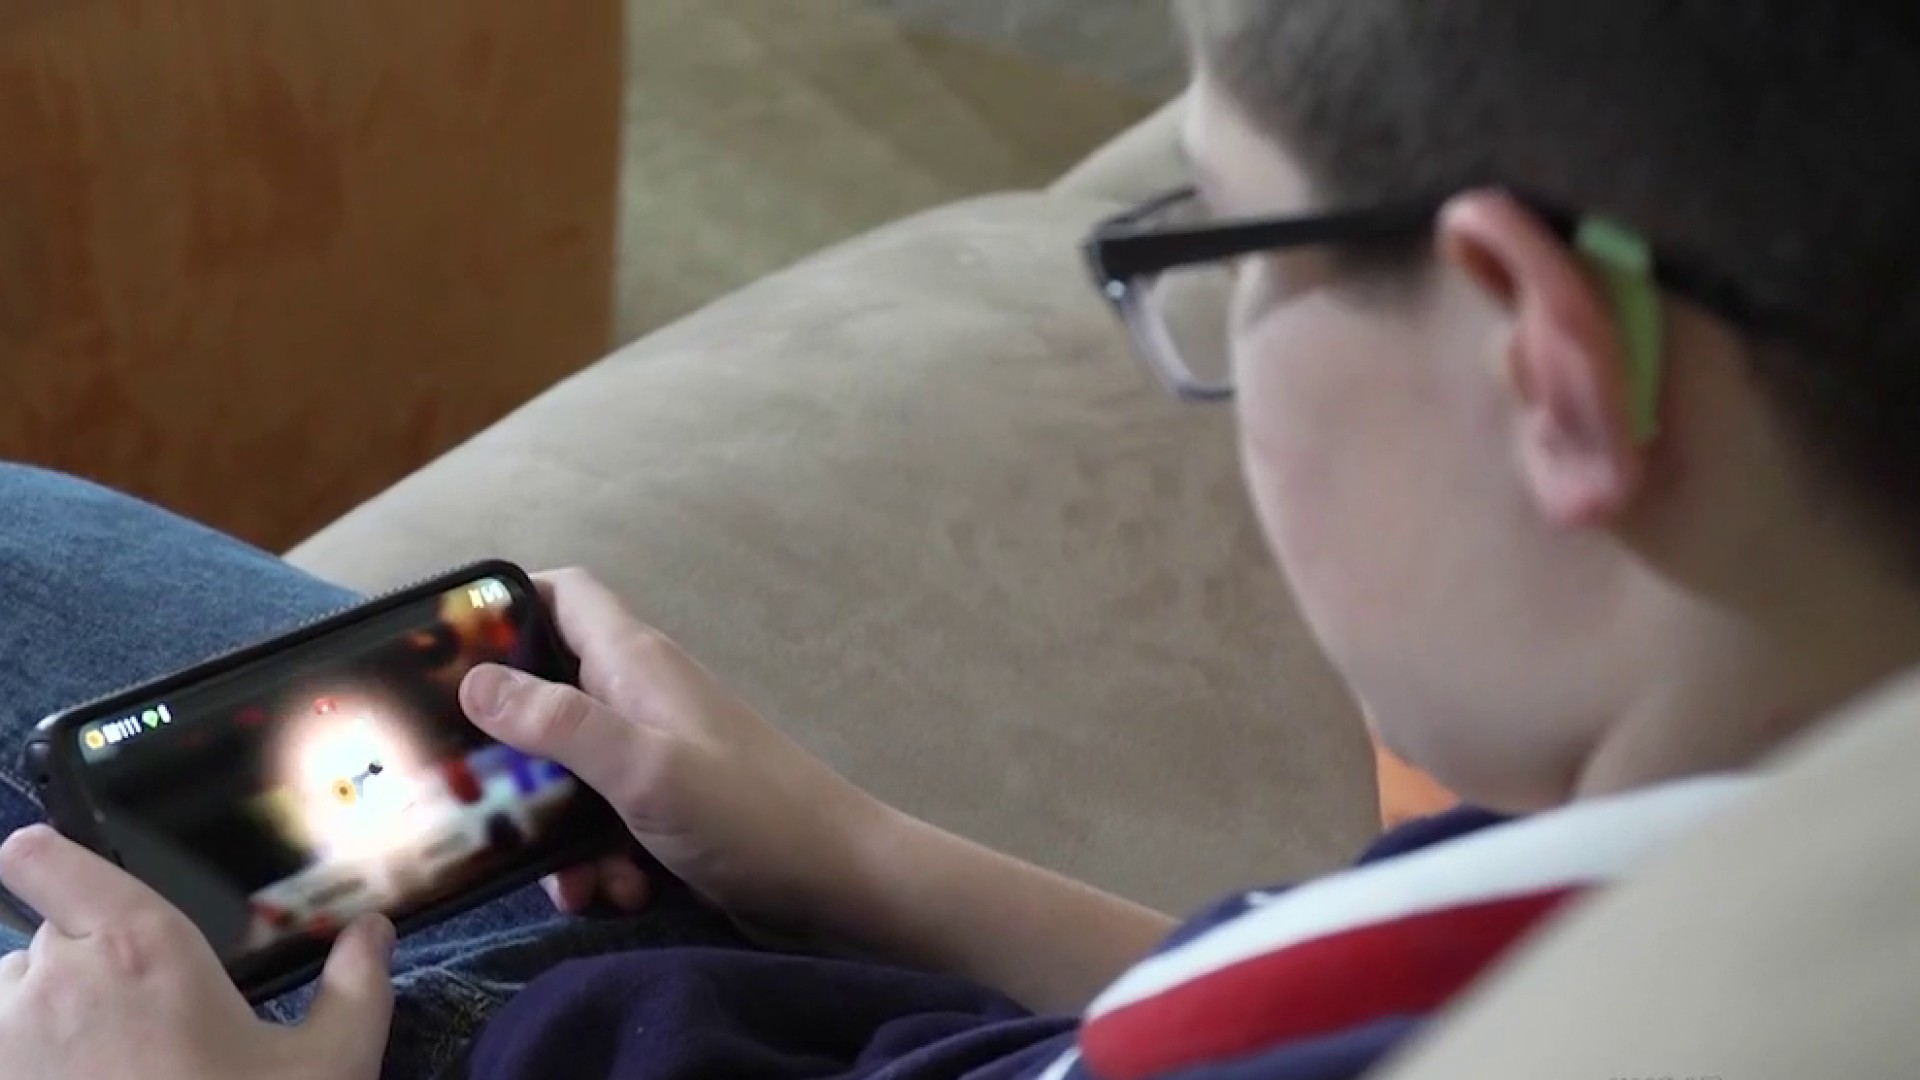 Children who play video games are MORE intelligent than their peers, study  suggests